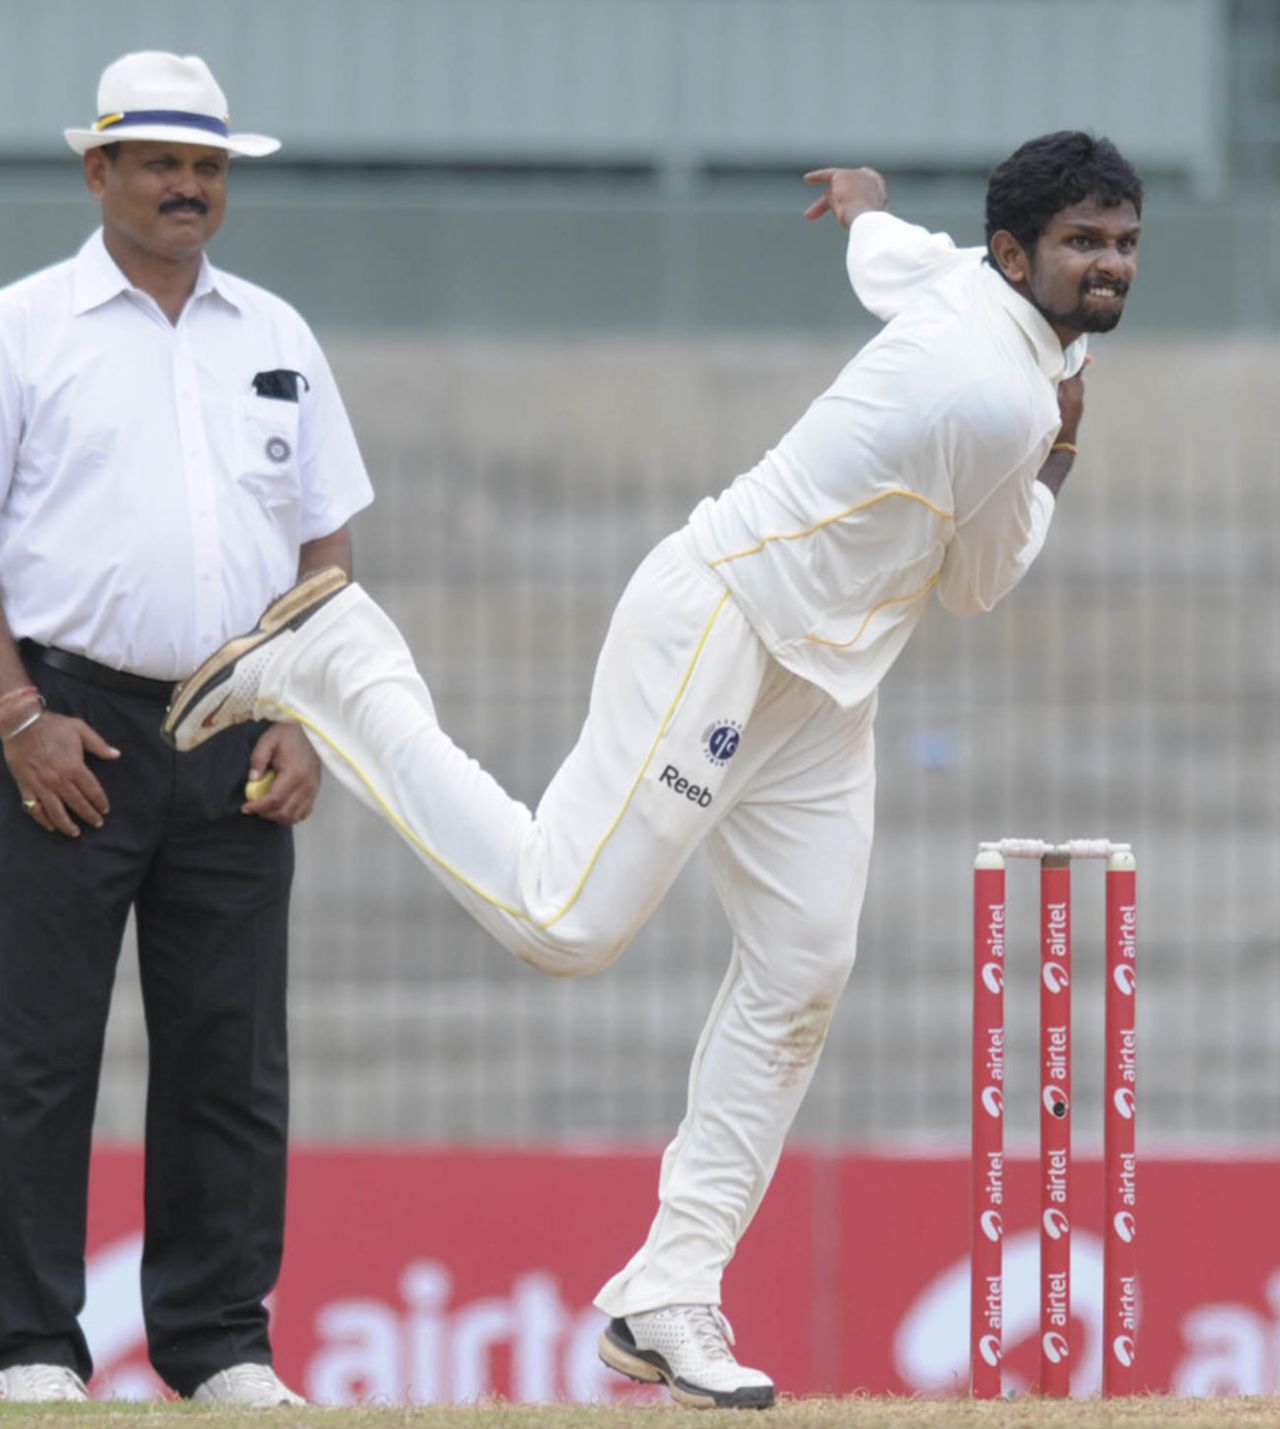 Offspinner Suresh Kumar took two wickets on the first day, Tamil Nadu v Gujarat, Ranji Trophy Super League, 1st day, Chennai, December 15, 2010